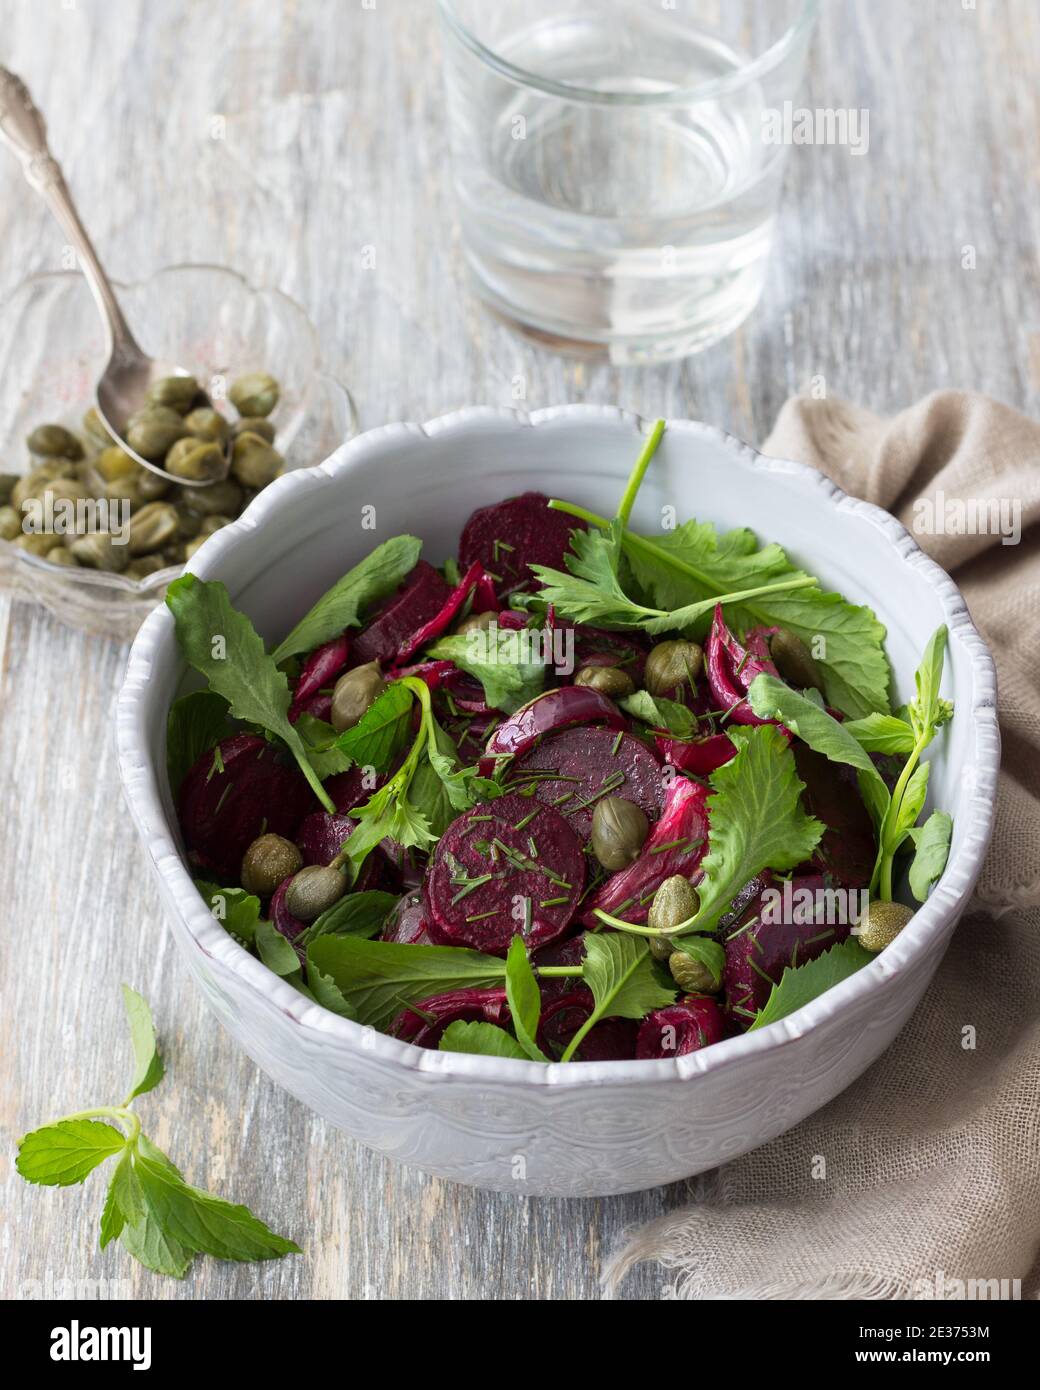 Vegan healthy beetroot salad with baked red onion, capers, watercress, greens and vinaigrette sauce on a wooden table. Delicious homemade food Stock Photo